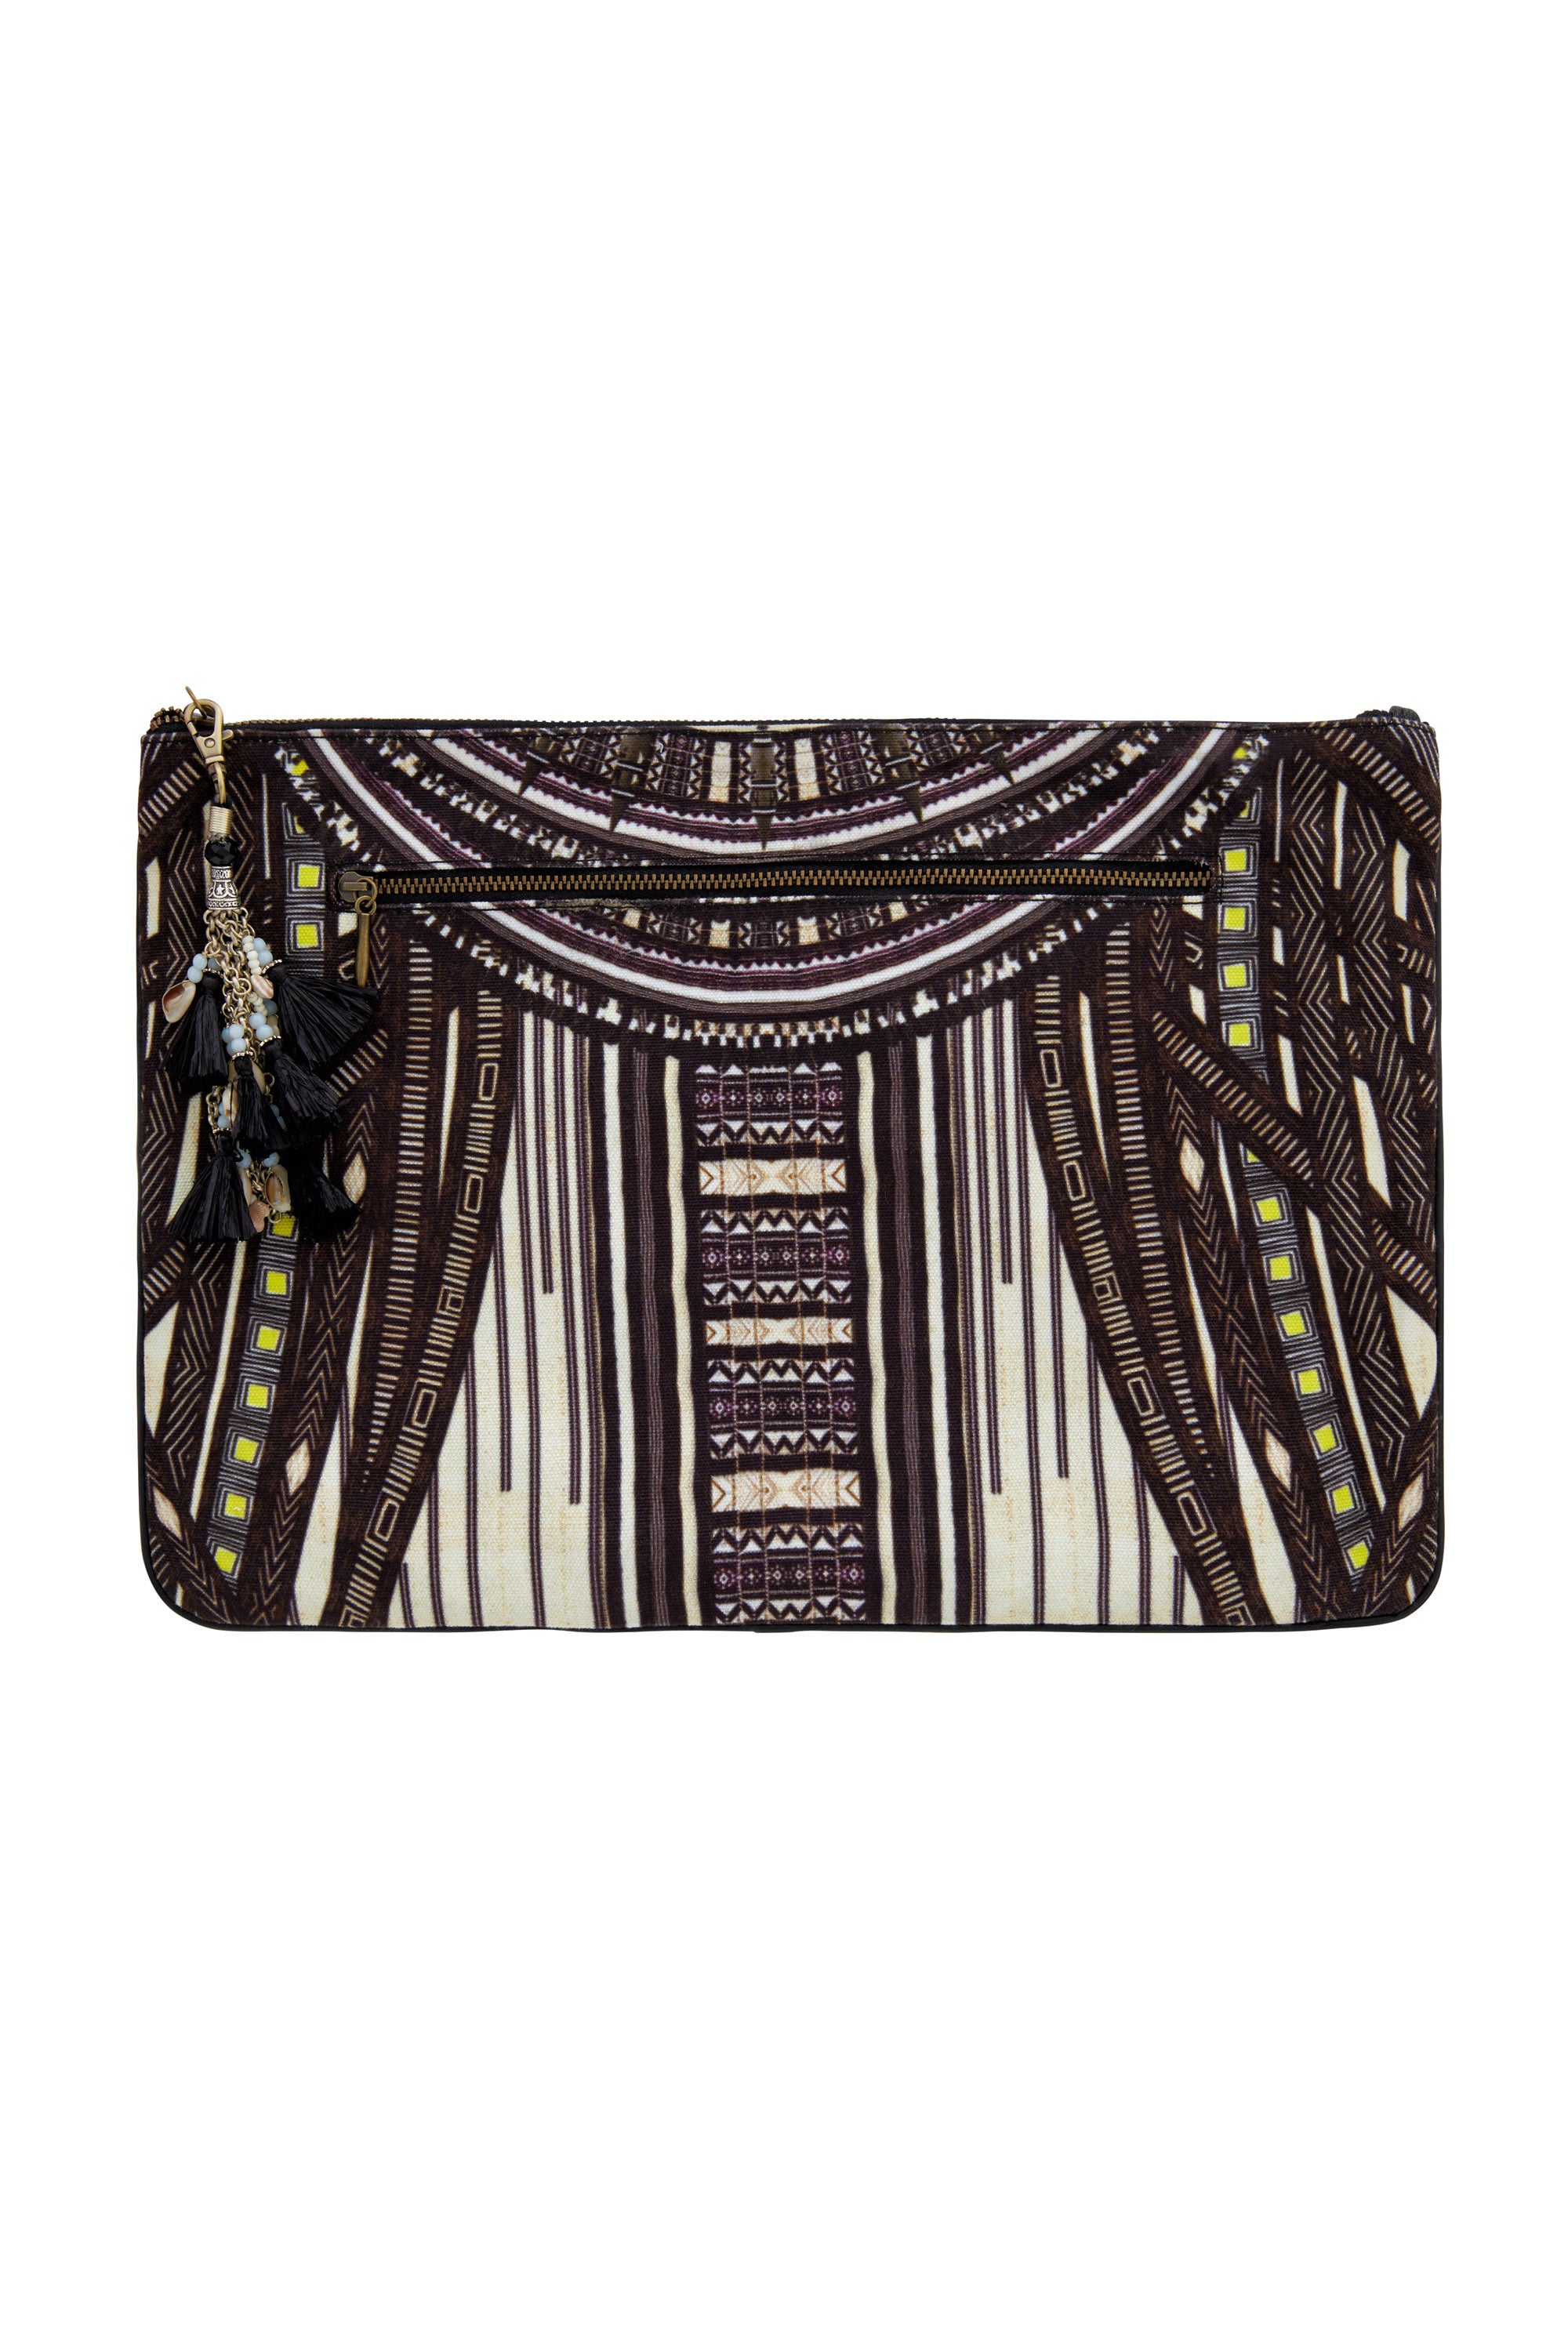 BETWEEN THE LINES LARGE CANVAS CLUTCH